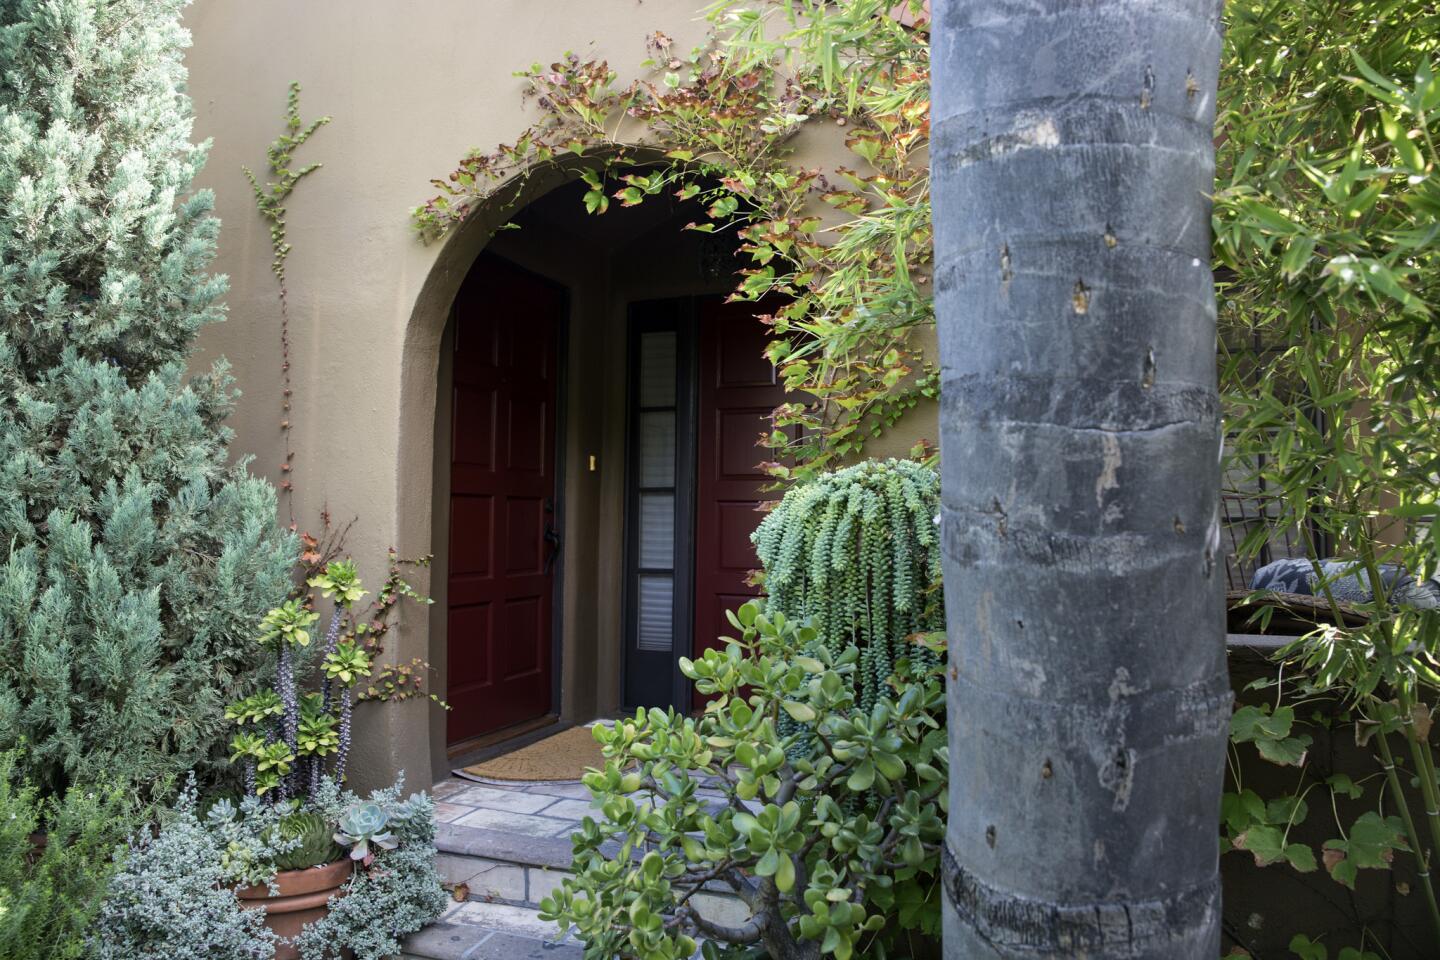 At left, the door to Tommy Chambers' home, and at right, the door to his interior design firm. He completely gutted and updated the 1923 row house after downsizing from a 4,000-square-foot house in the Hollywood Hills.